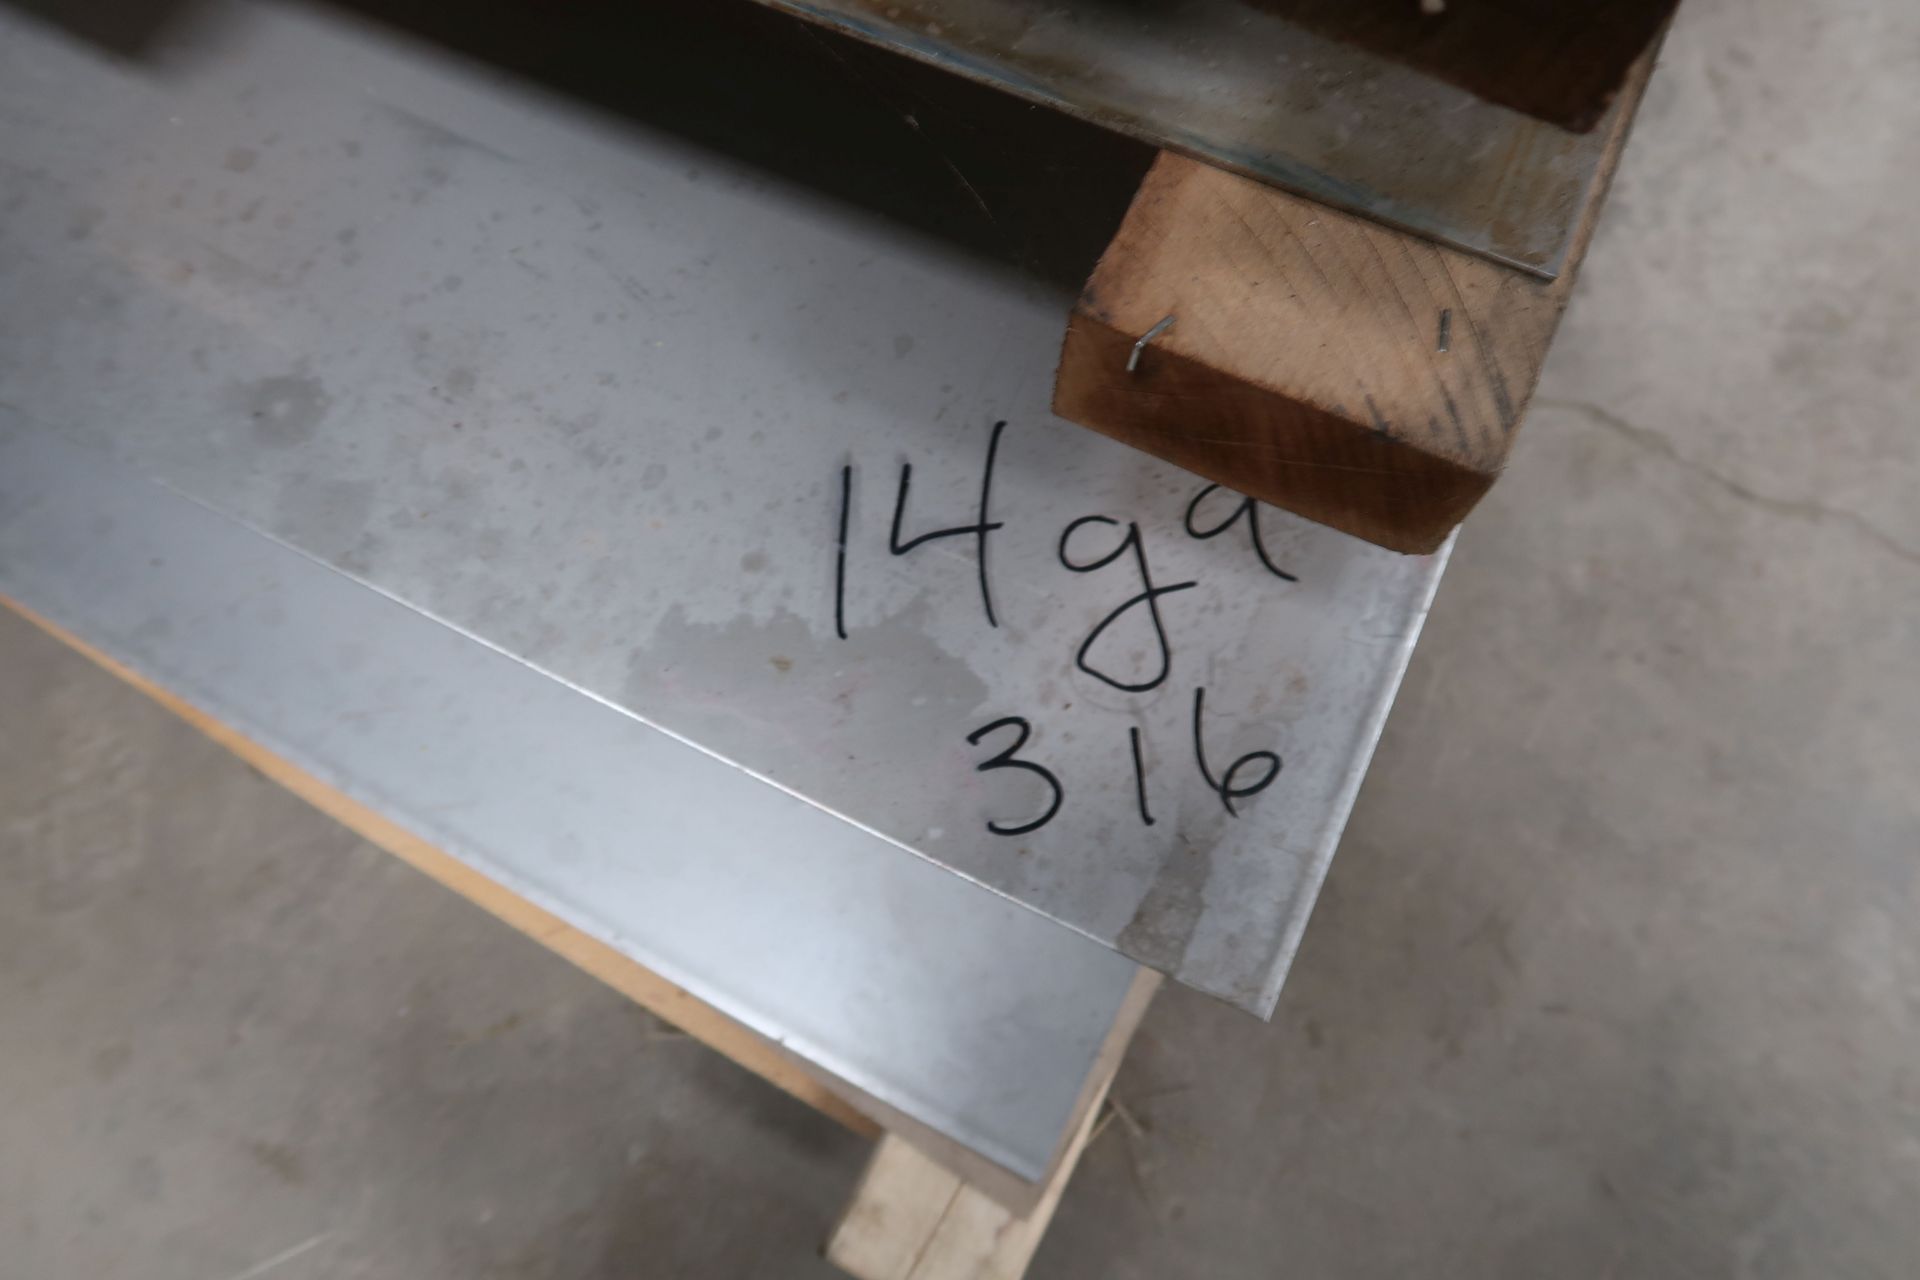 (LOT) (9) TOTAL MISCELLANEOUS SIZE STAINLESS STEEL SHEETS - (3) PIECES 438" X 48" X 14 GA - Image 8 of 9